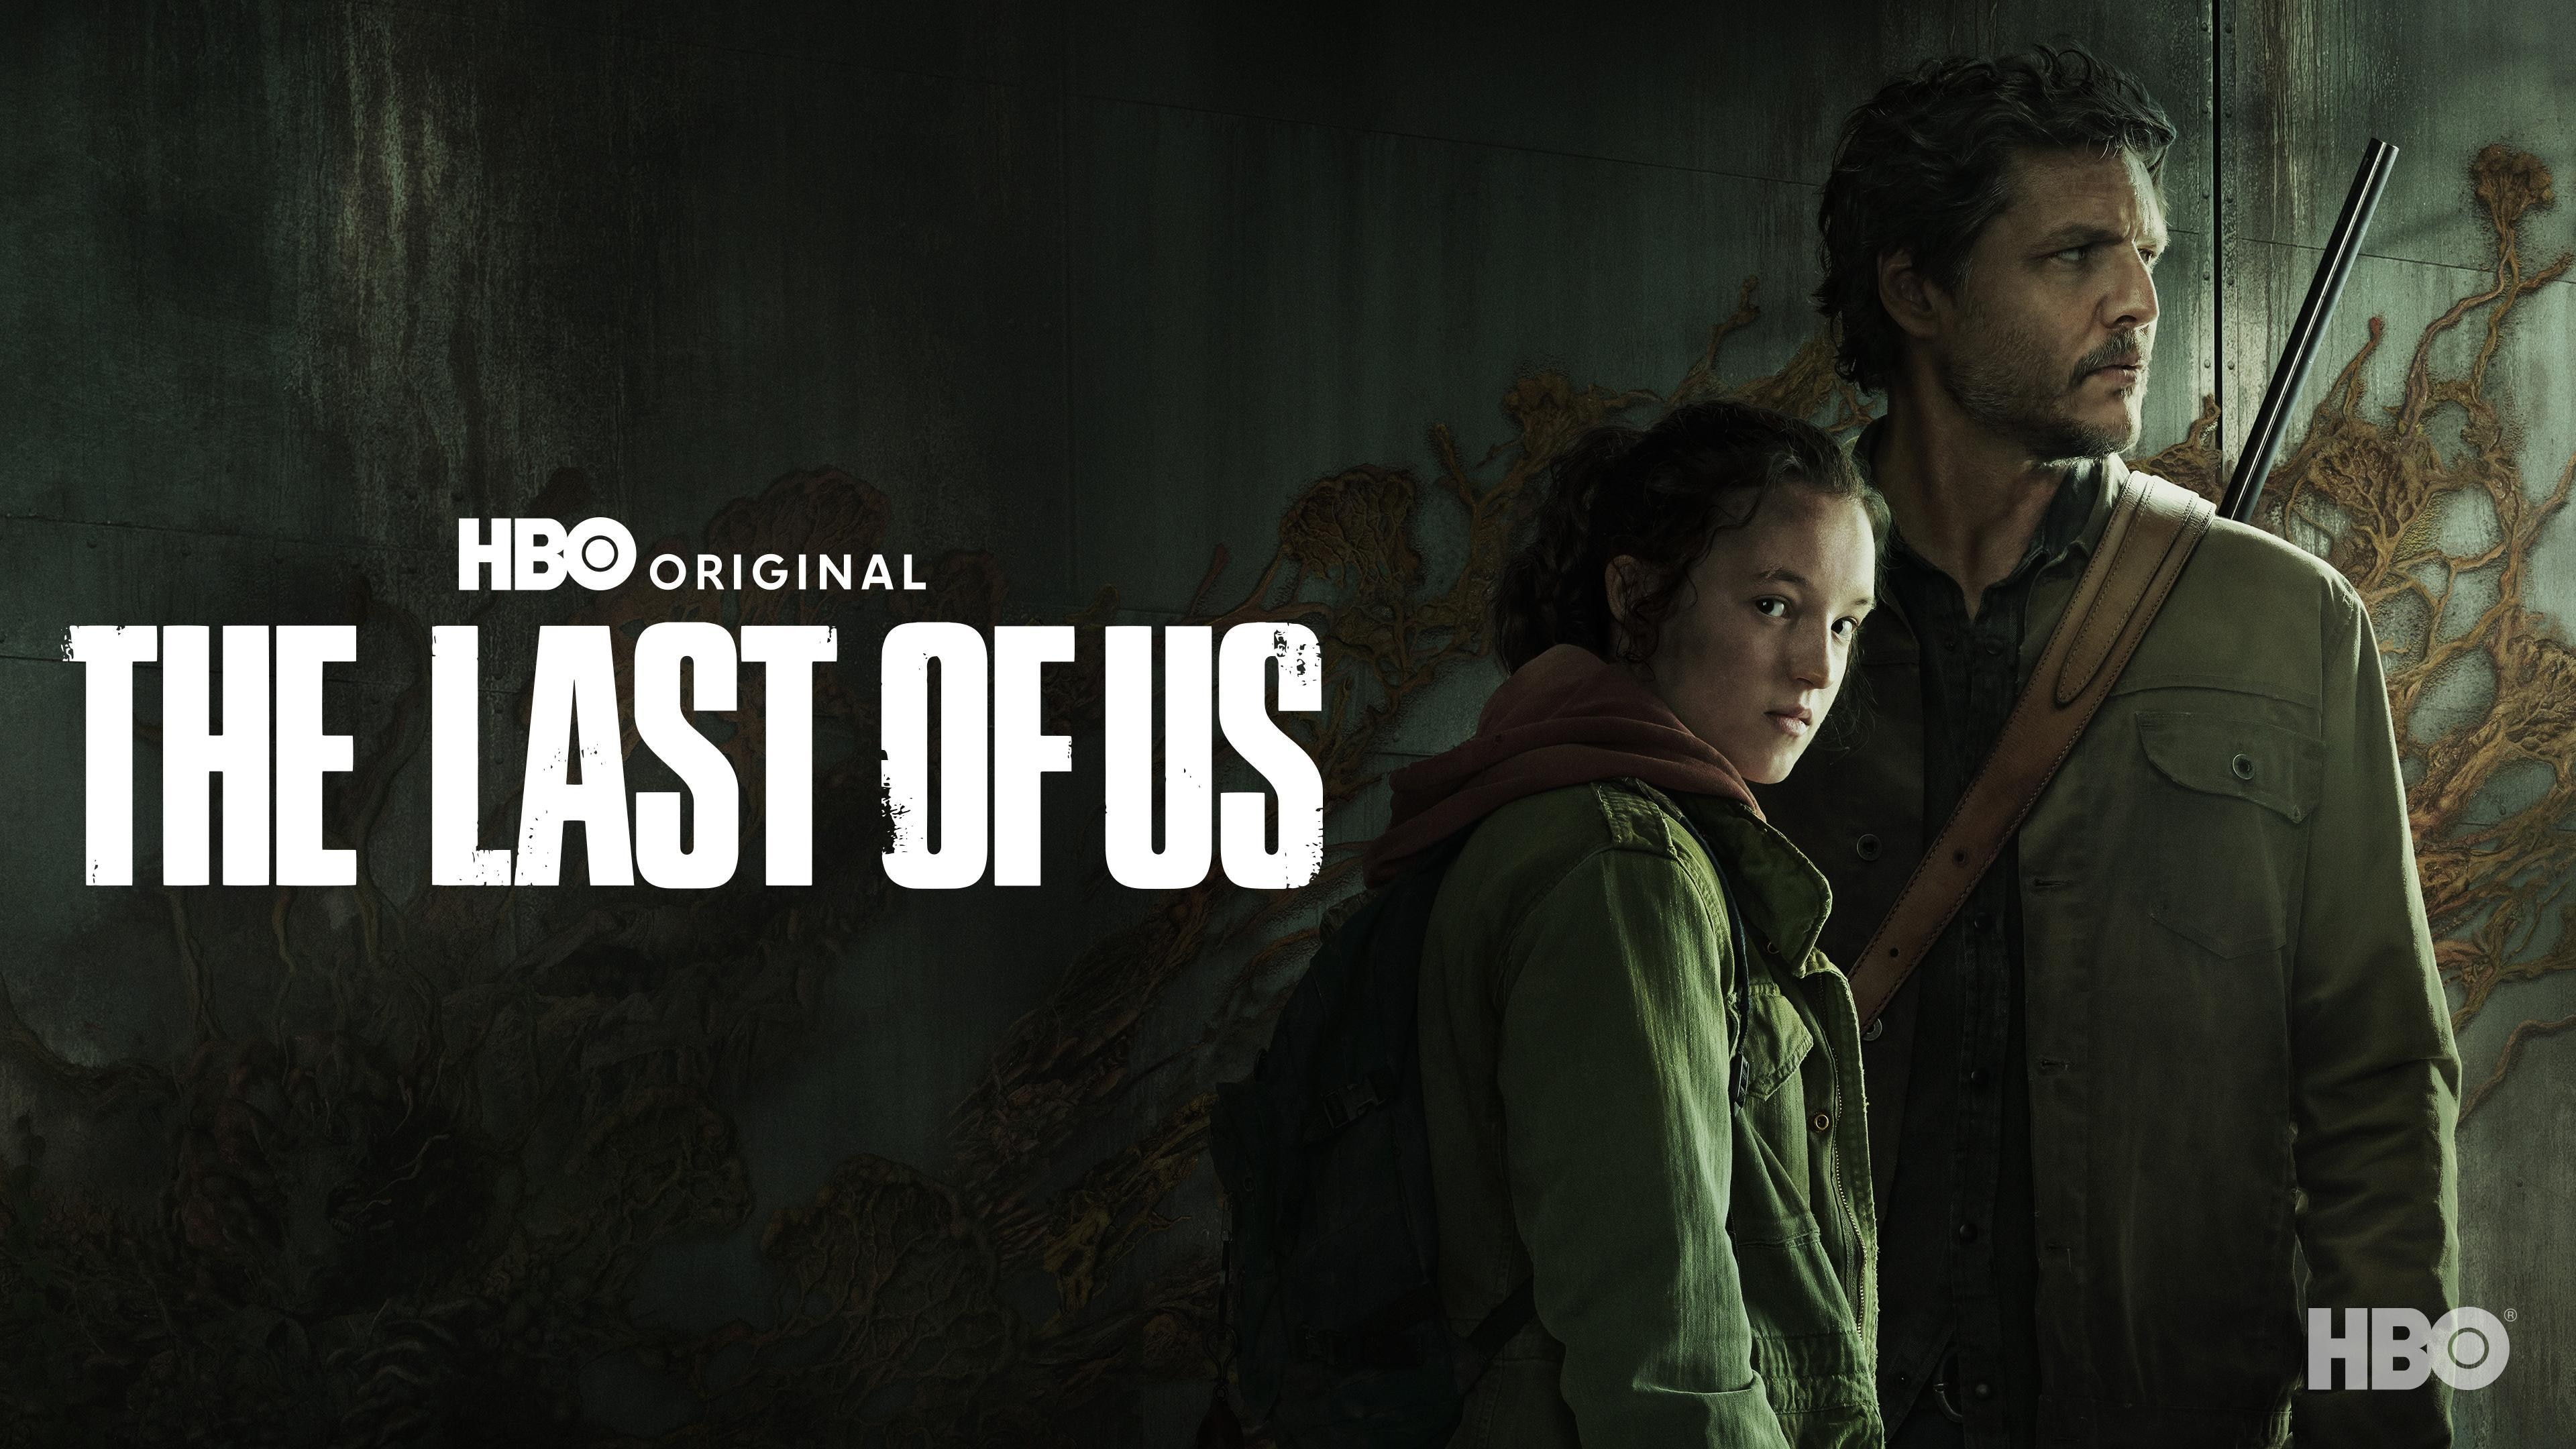 The Last Of Us: How to watch episode 1 as it is released online